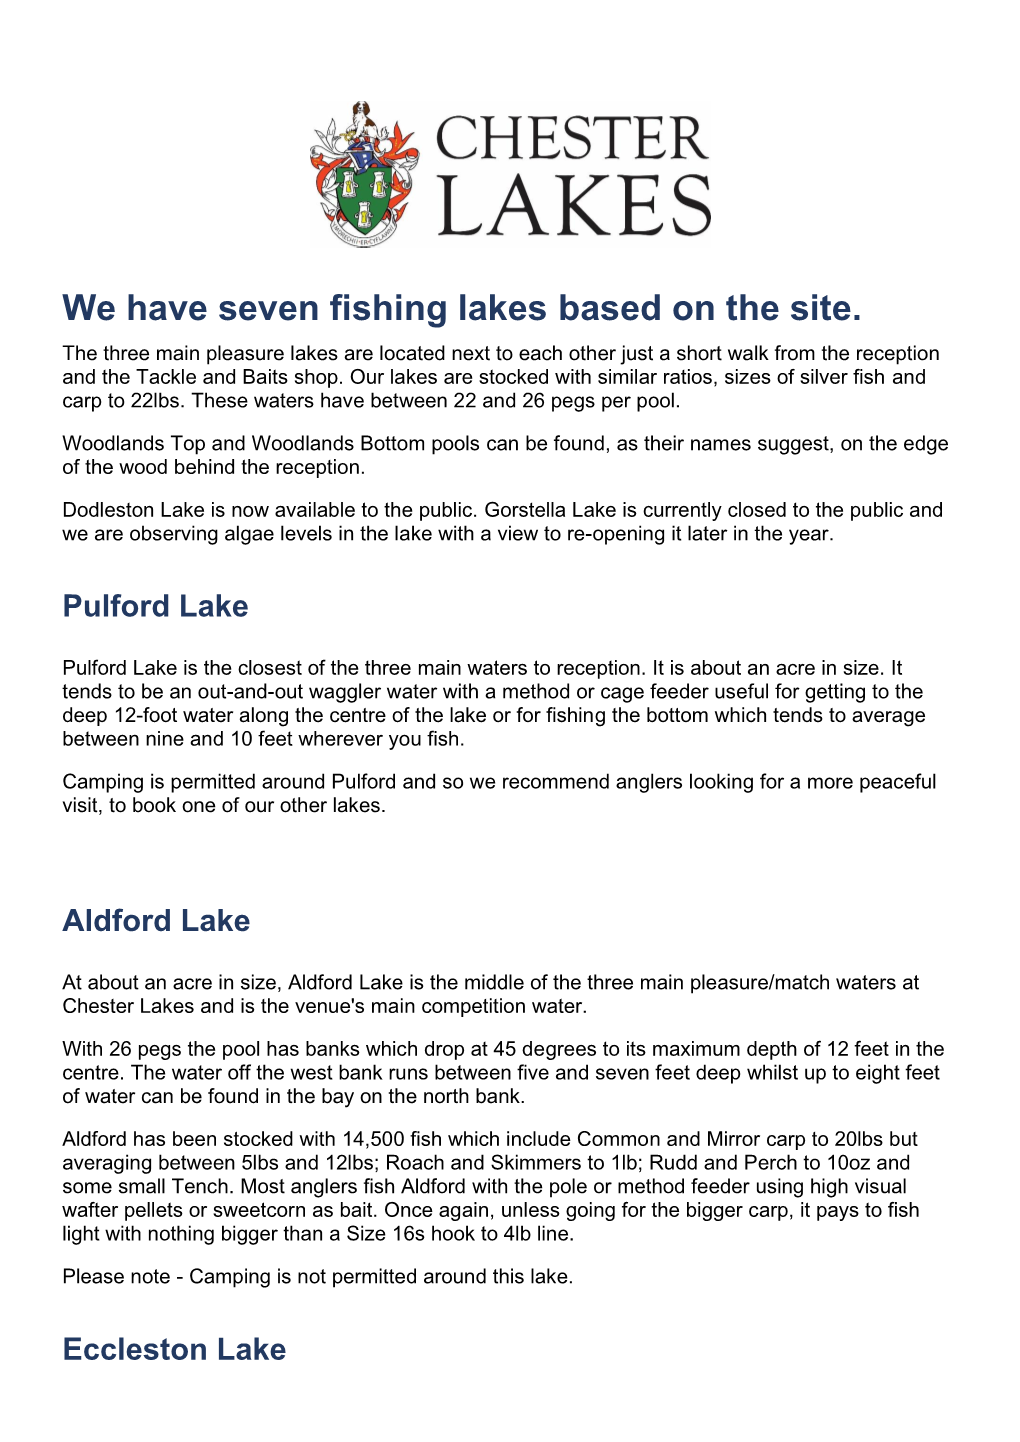 For a Printable Information Sheet on Fishing the Lakes